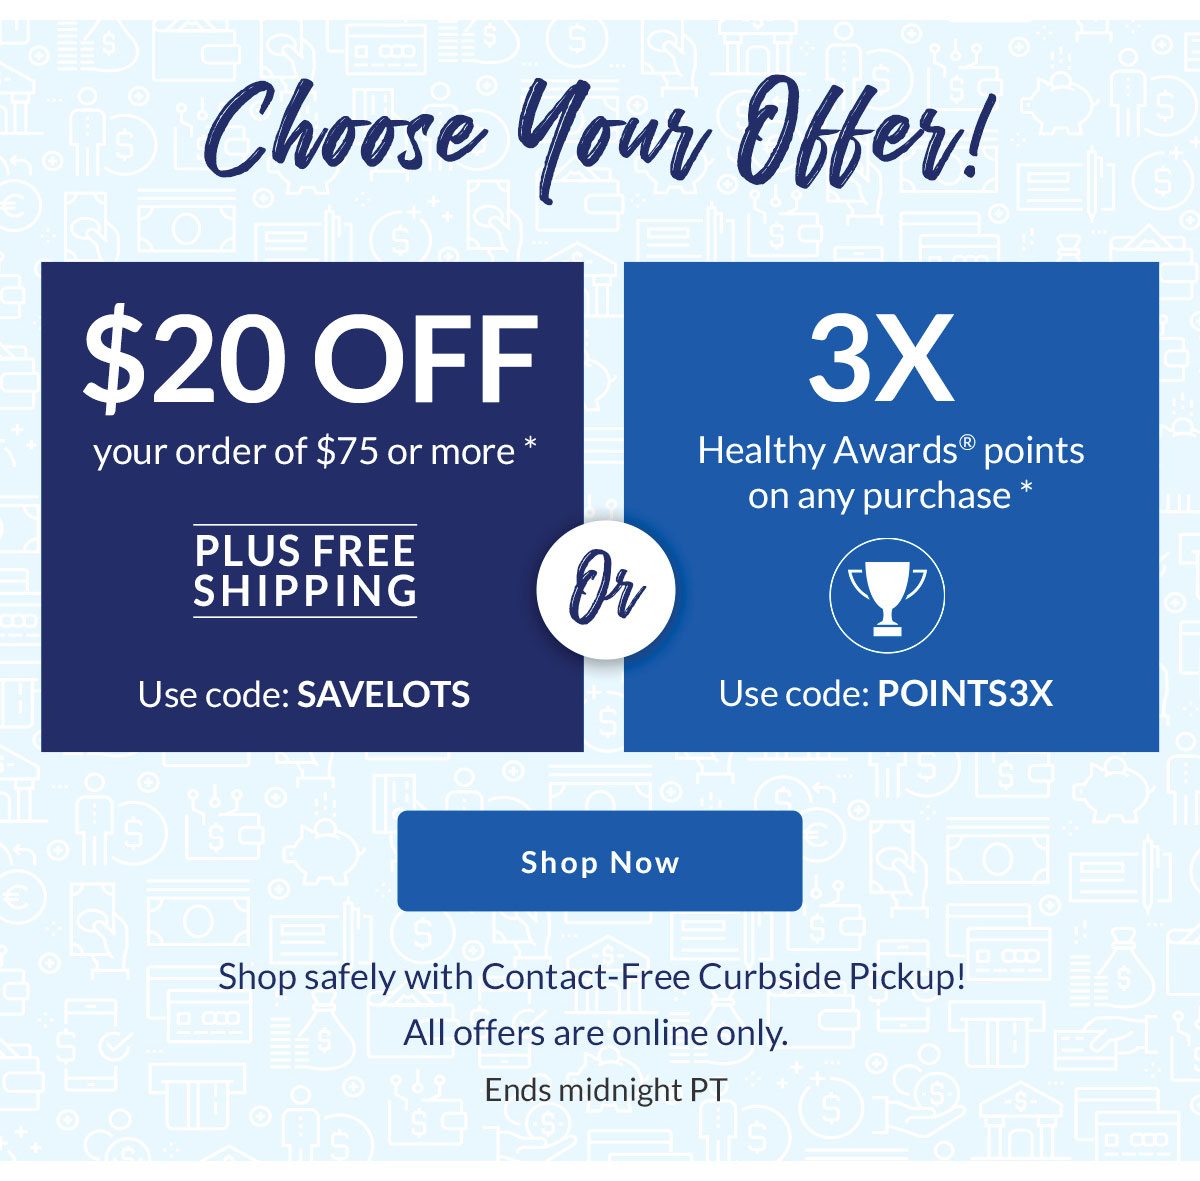 Choose Your Offer! | $20 OFF your order of $75 or more * | PLUS FREE SHIPPING | Use code: SAVELOTS | Or | 3X Healthy Awards points on any purchase * | Use code: POINTS3X | Shop Now | Shop safely with Contact-Free Curbside Pickup! All offers are online only. Ends 5/19/2020